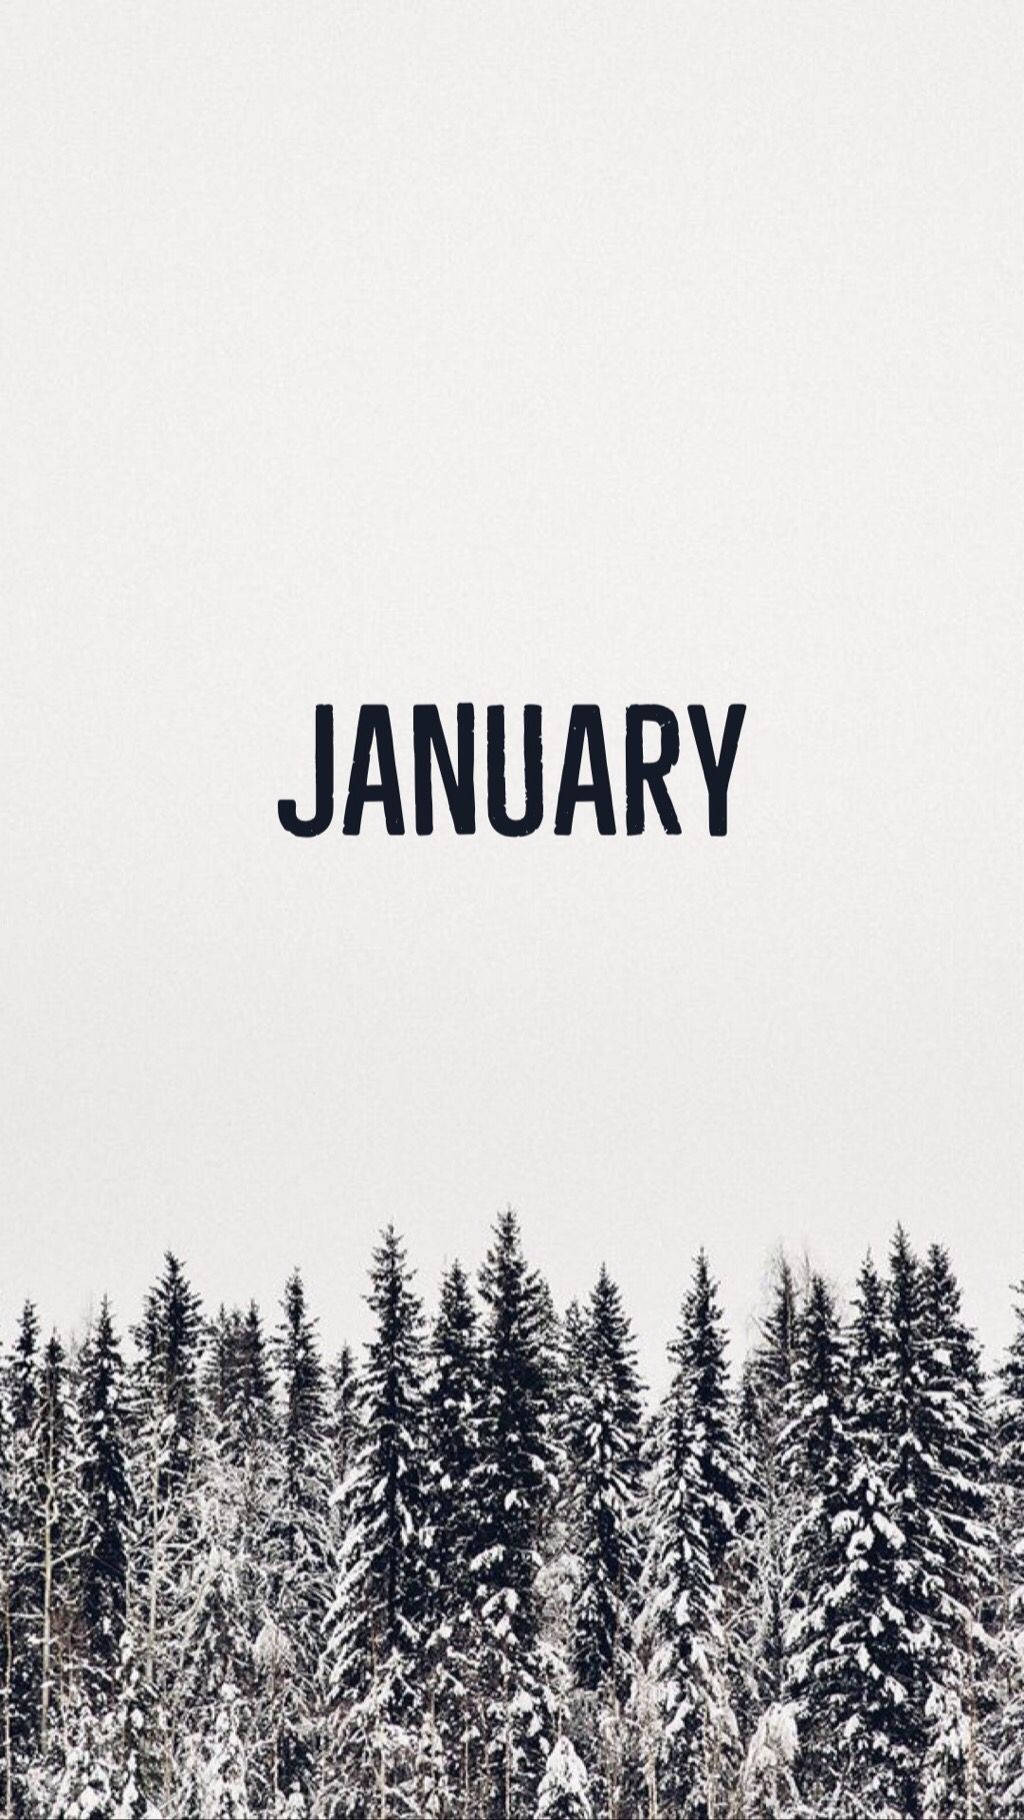 Free January Wallpaper Downloads, January Wallpaper for FREE